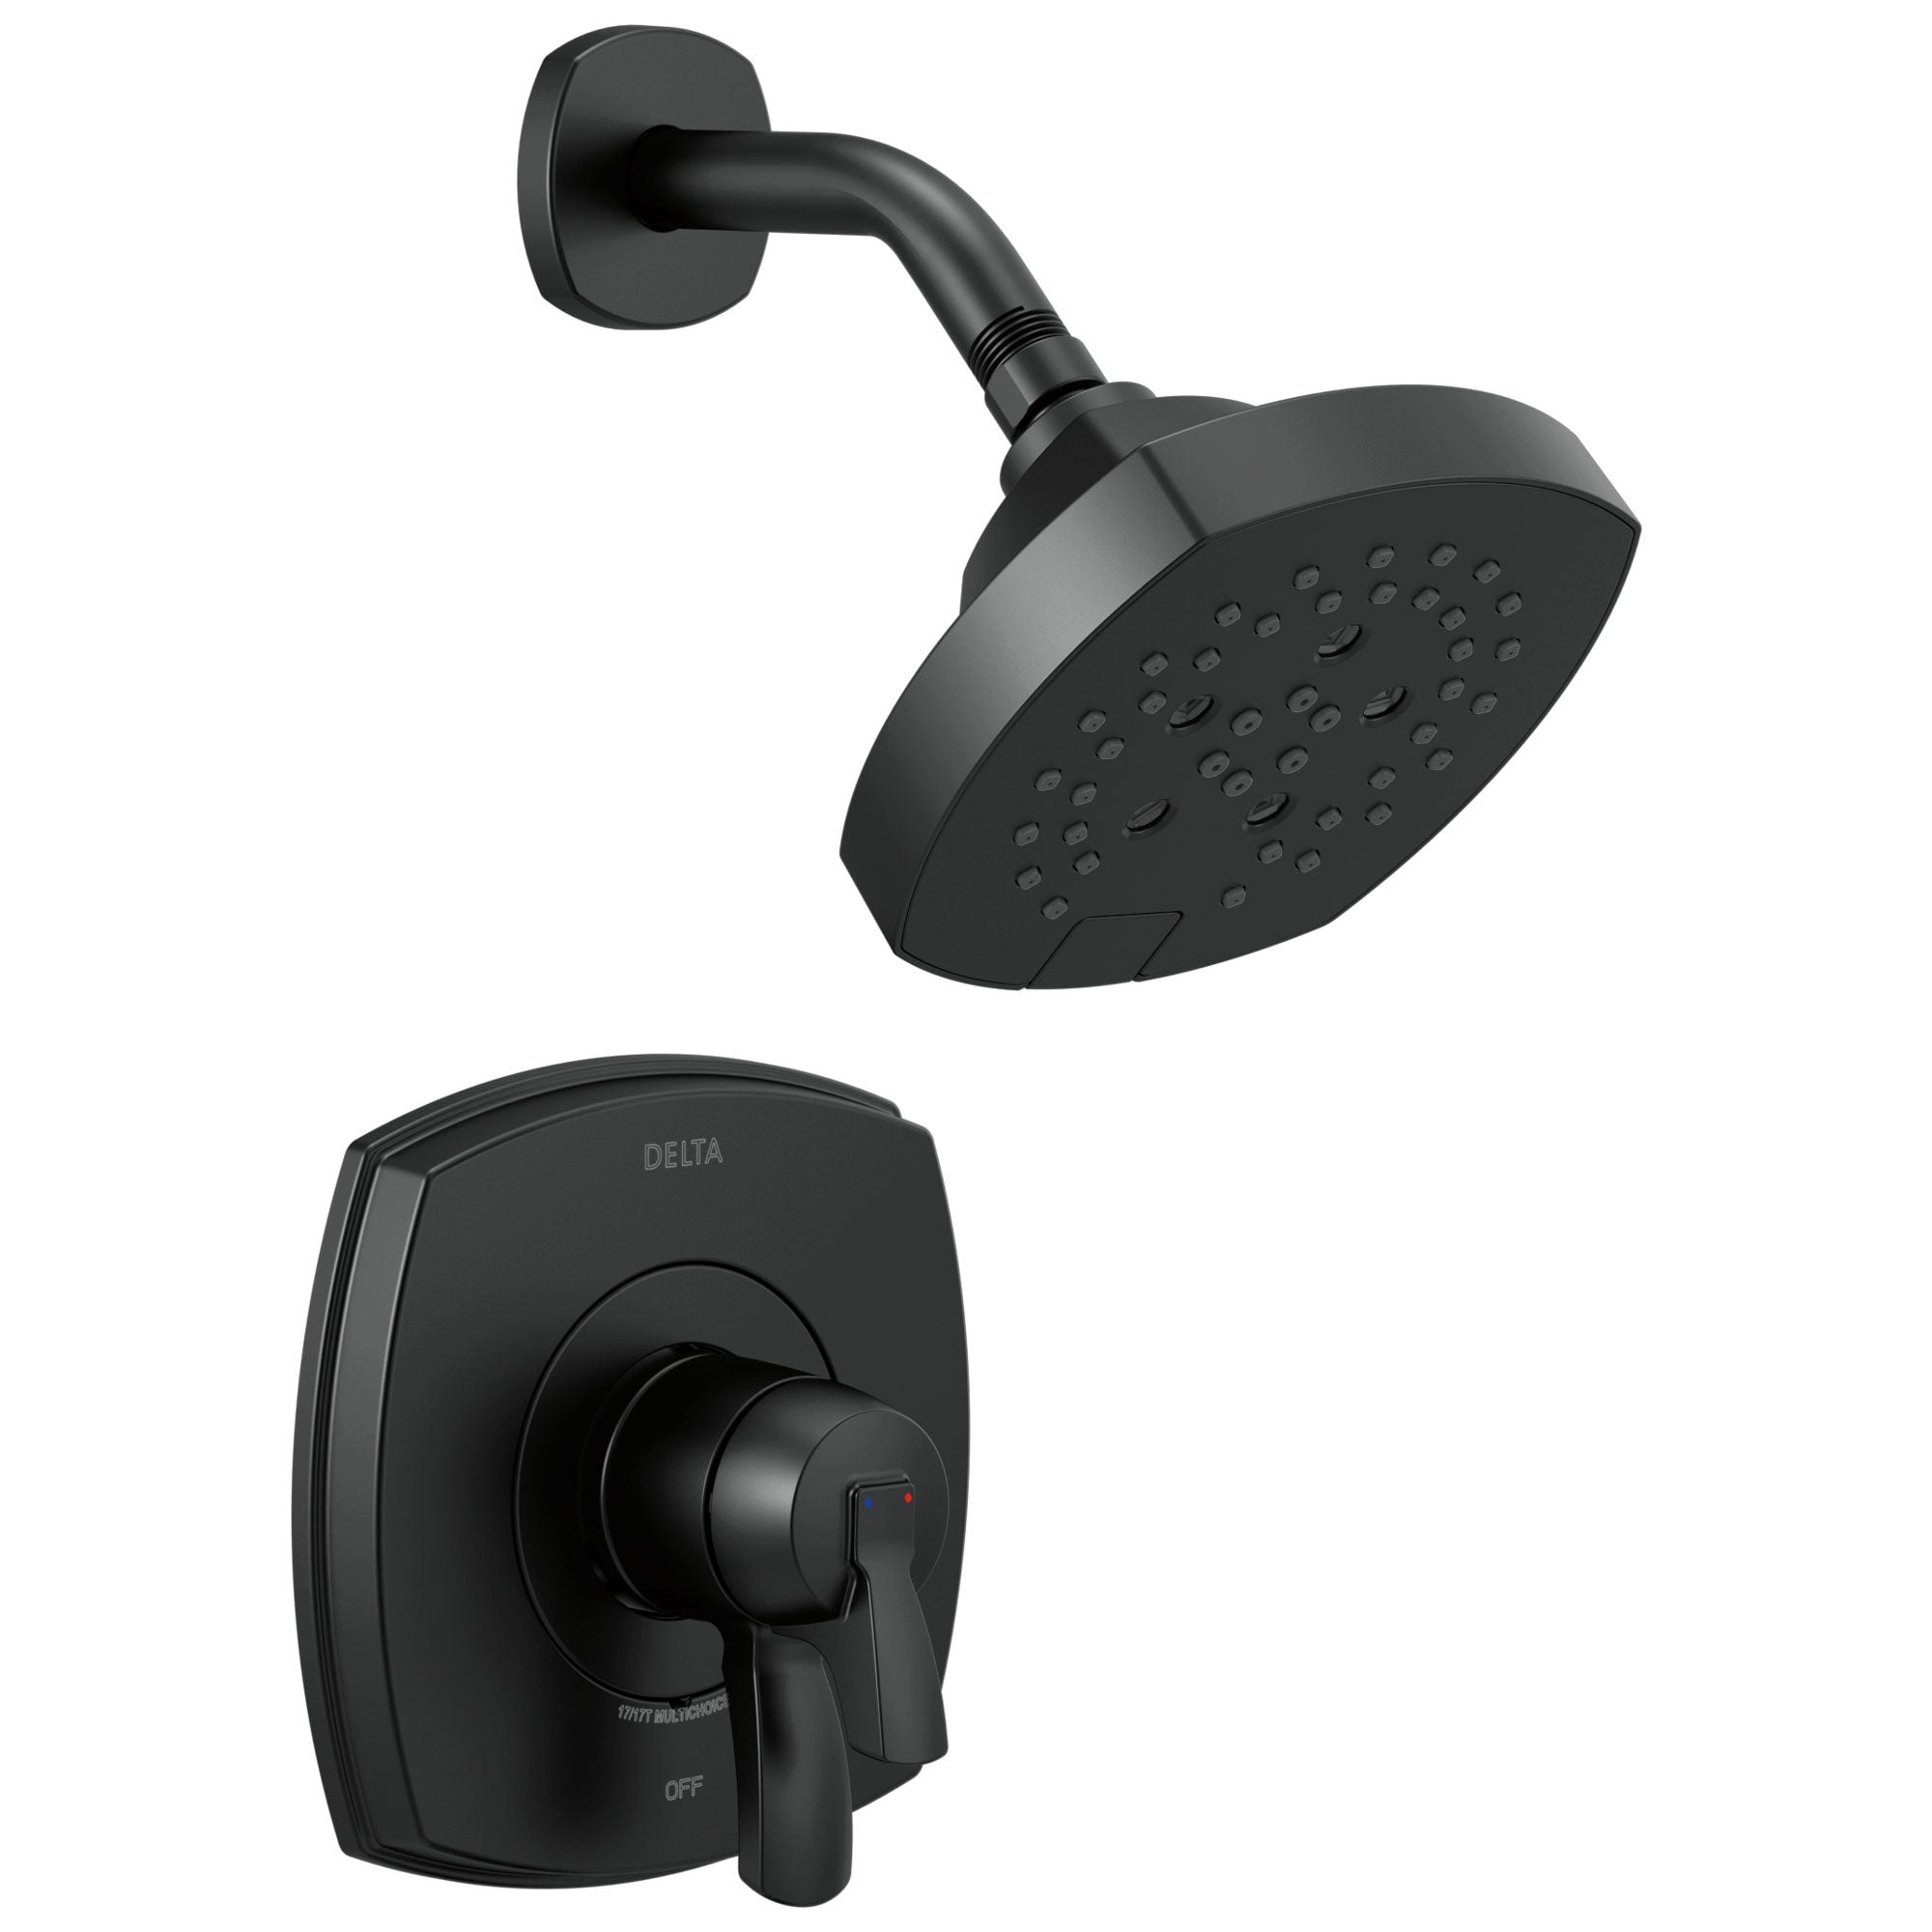 Delta Stryke Matte Black Finish Monitor 17 Series Shower Only Faucet Includes Handles, Cartridge, and Valve with Stops D3368V